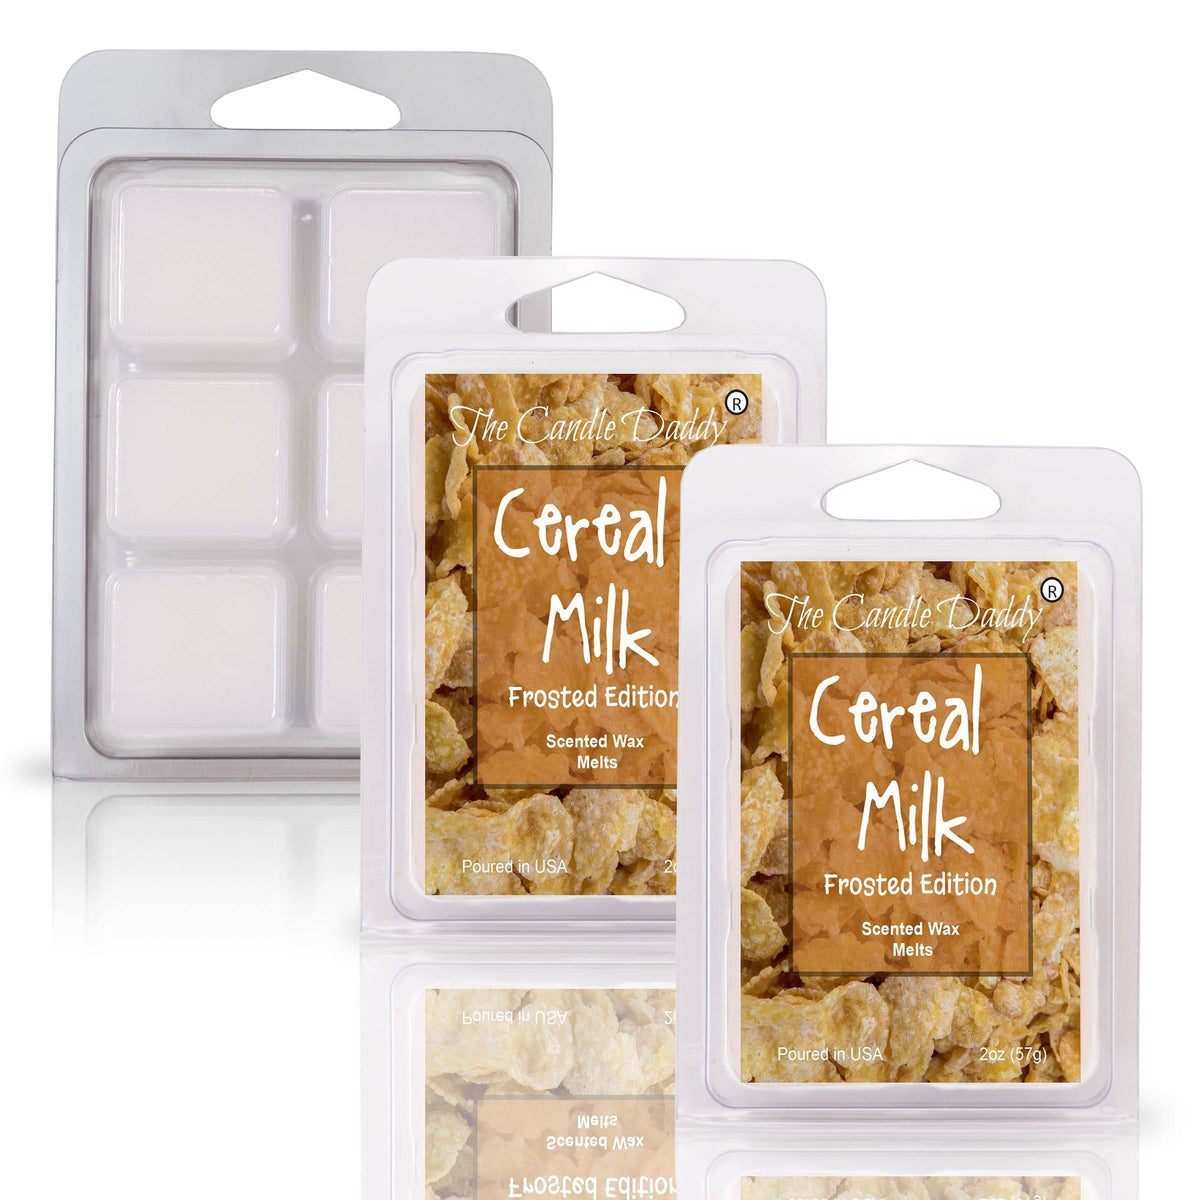 Cereal Milk - Cinnamon Toast Version Scented Wax Melt - 1 Pack - 2 Ounces -  6 Cubes